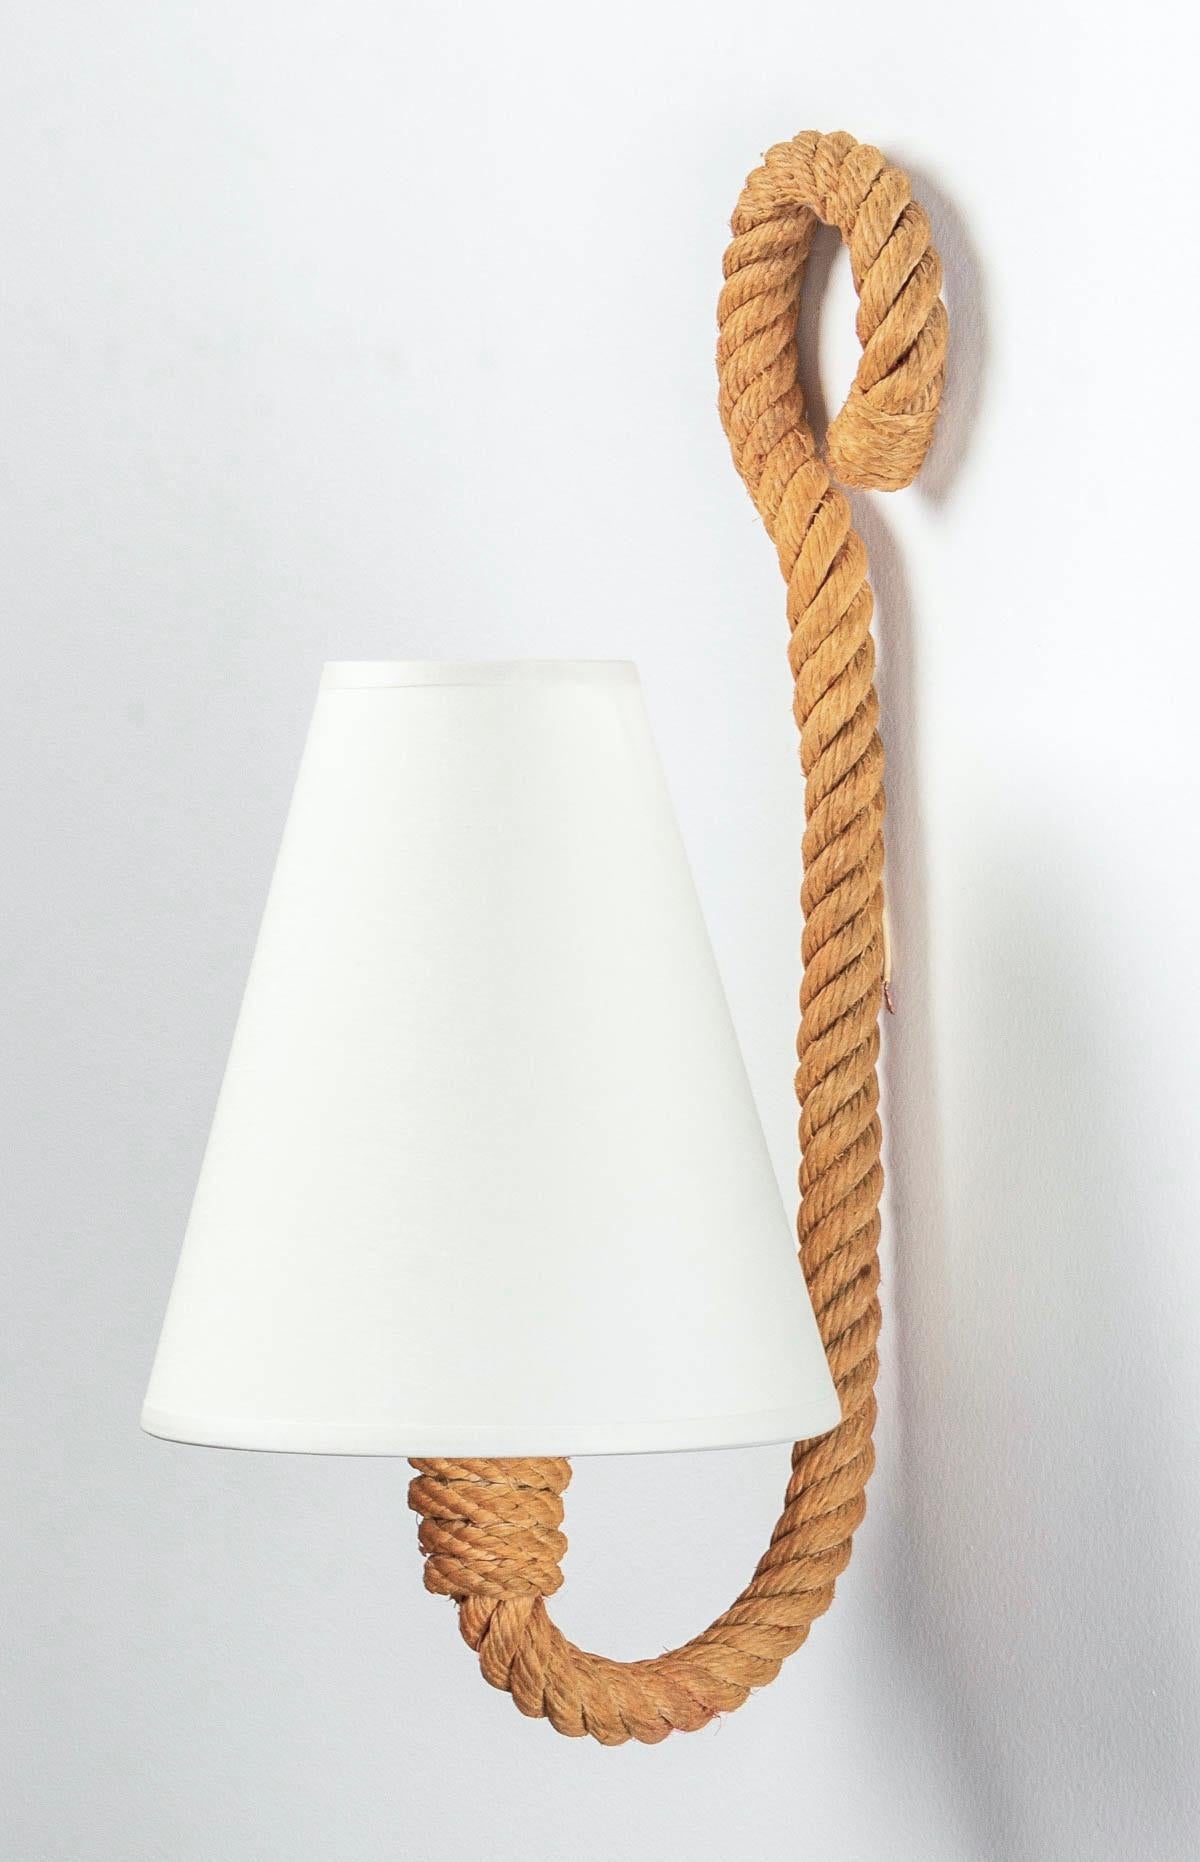 Composed of a luminous arm in rope decorated with a loop on the upper part, on the lower part the arm goes up to form the wall lamp, it is dressed with a lampshade of off-white color. 
1 bulb.

Adrien Audoux and Frida Minet are known for their work